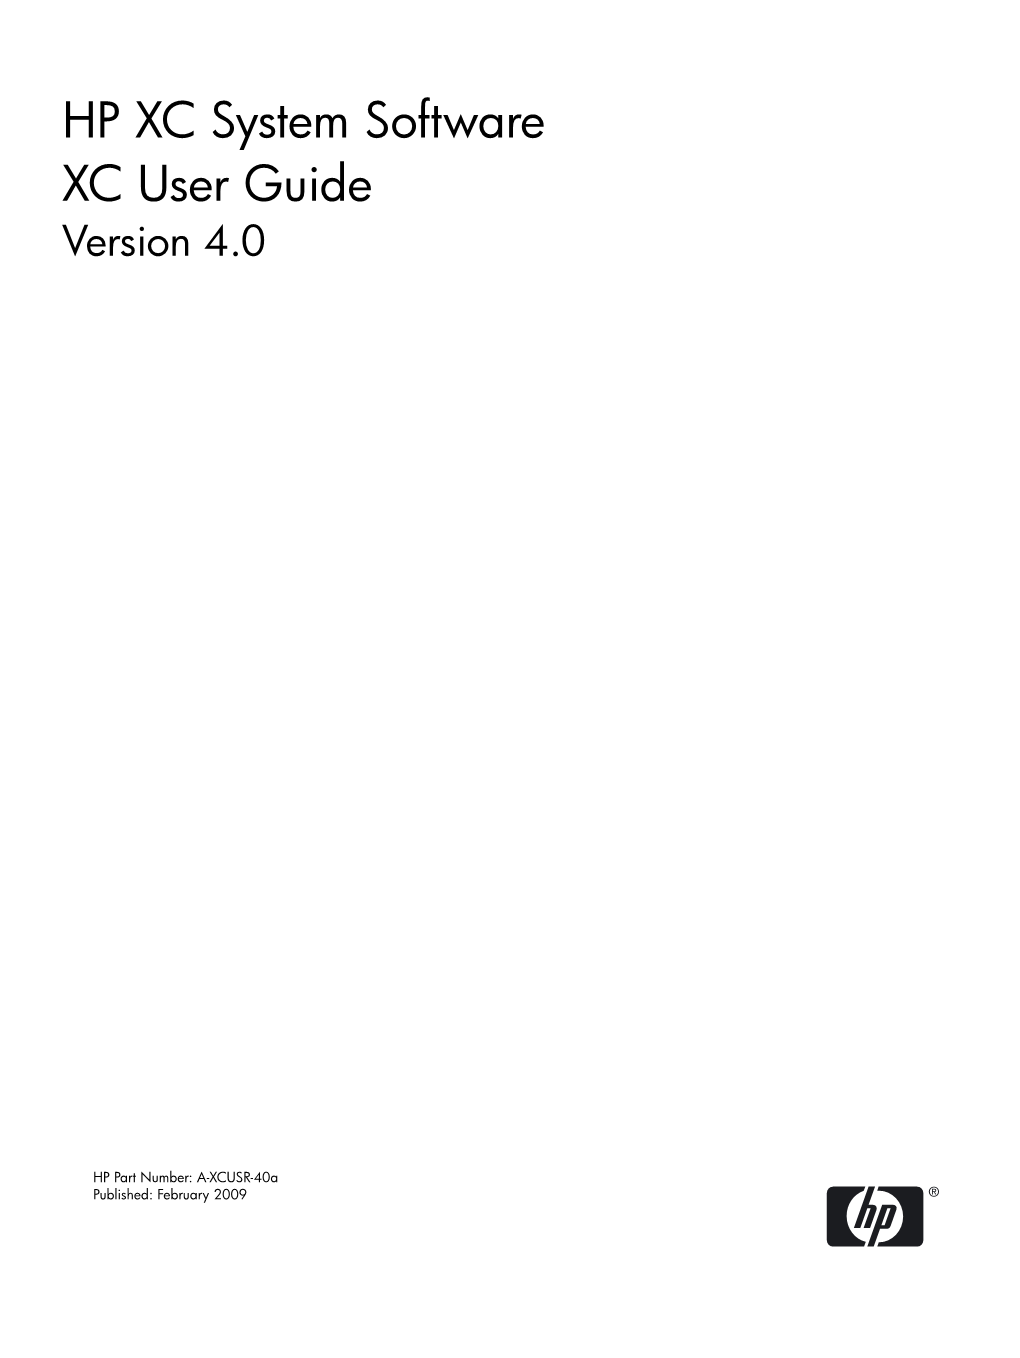 XC User Guide Version 4.0